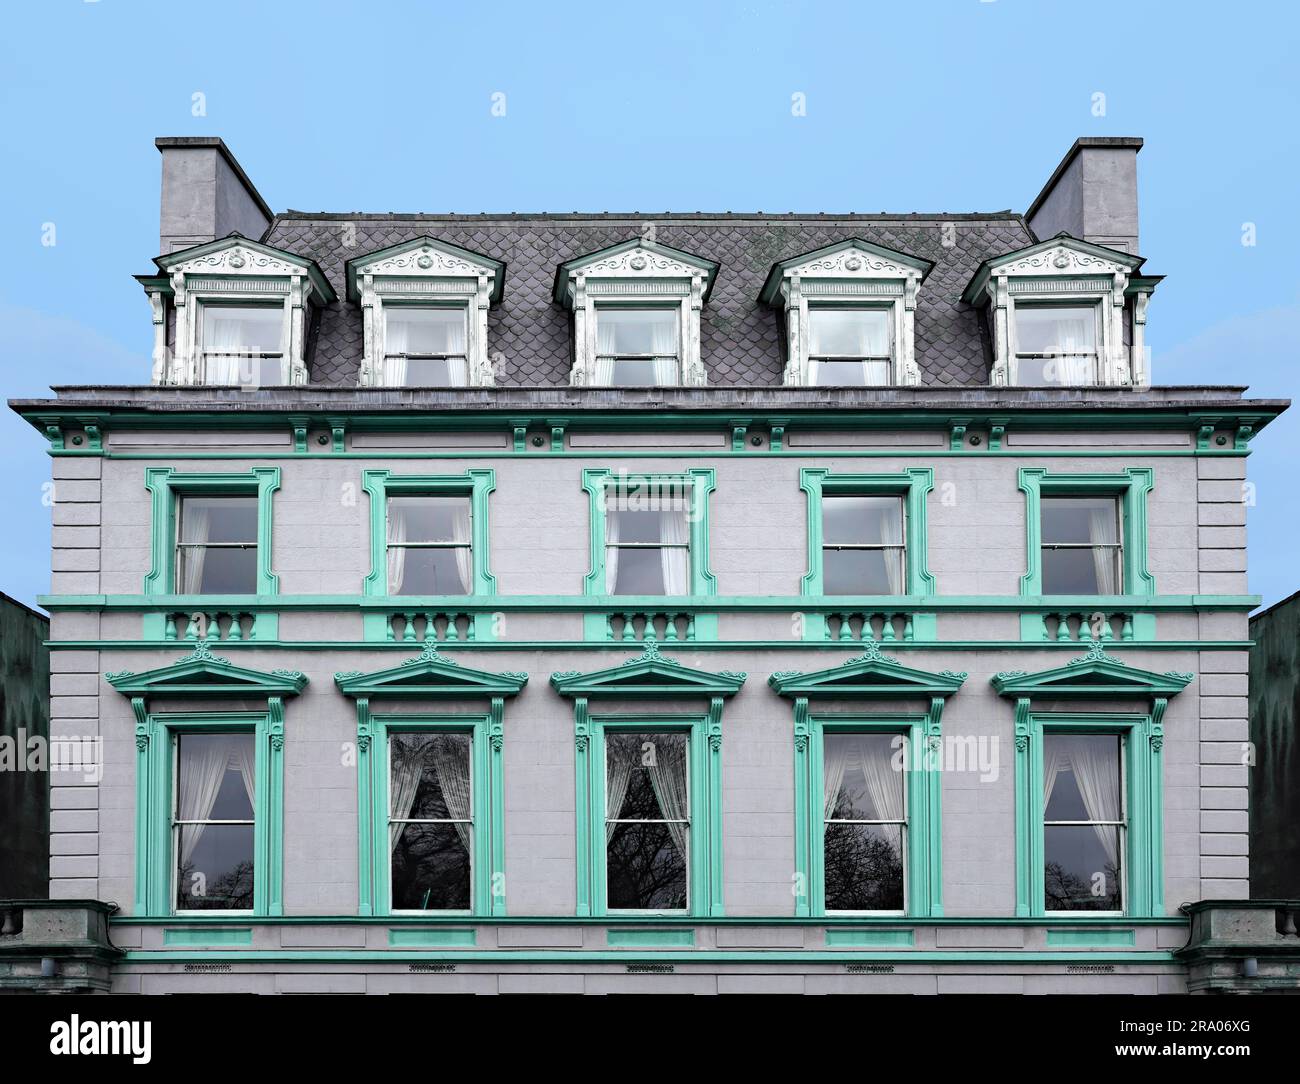 Old apartment building with mansard roof and ornate frames around windows Stock Photo